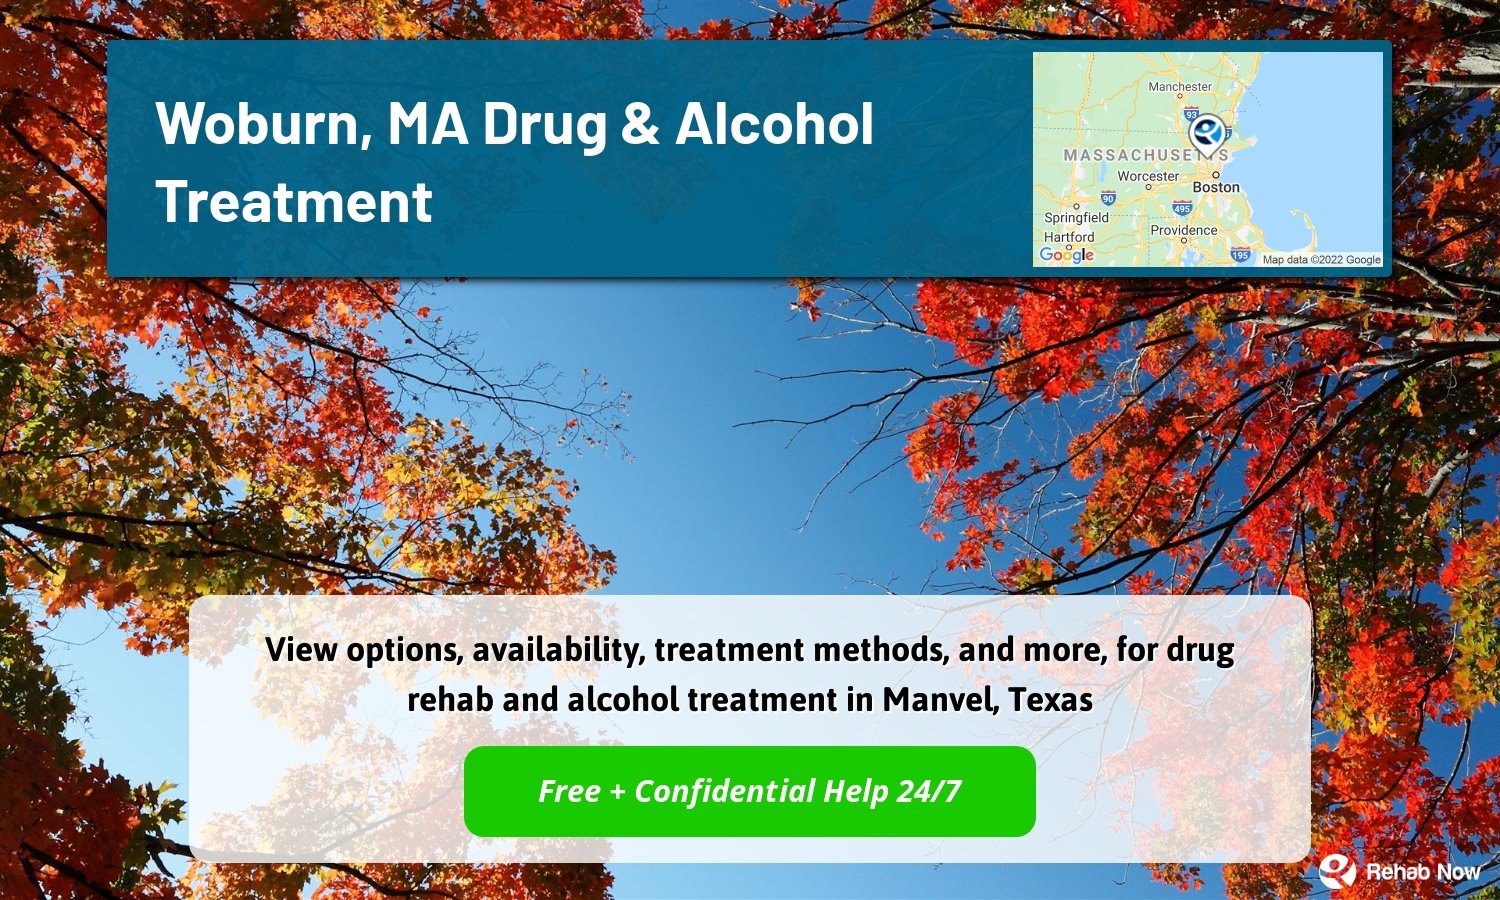 View options, availability, treatment methods, and more, for drug rehab and alcohol treatment in Manvel, Texas